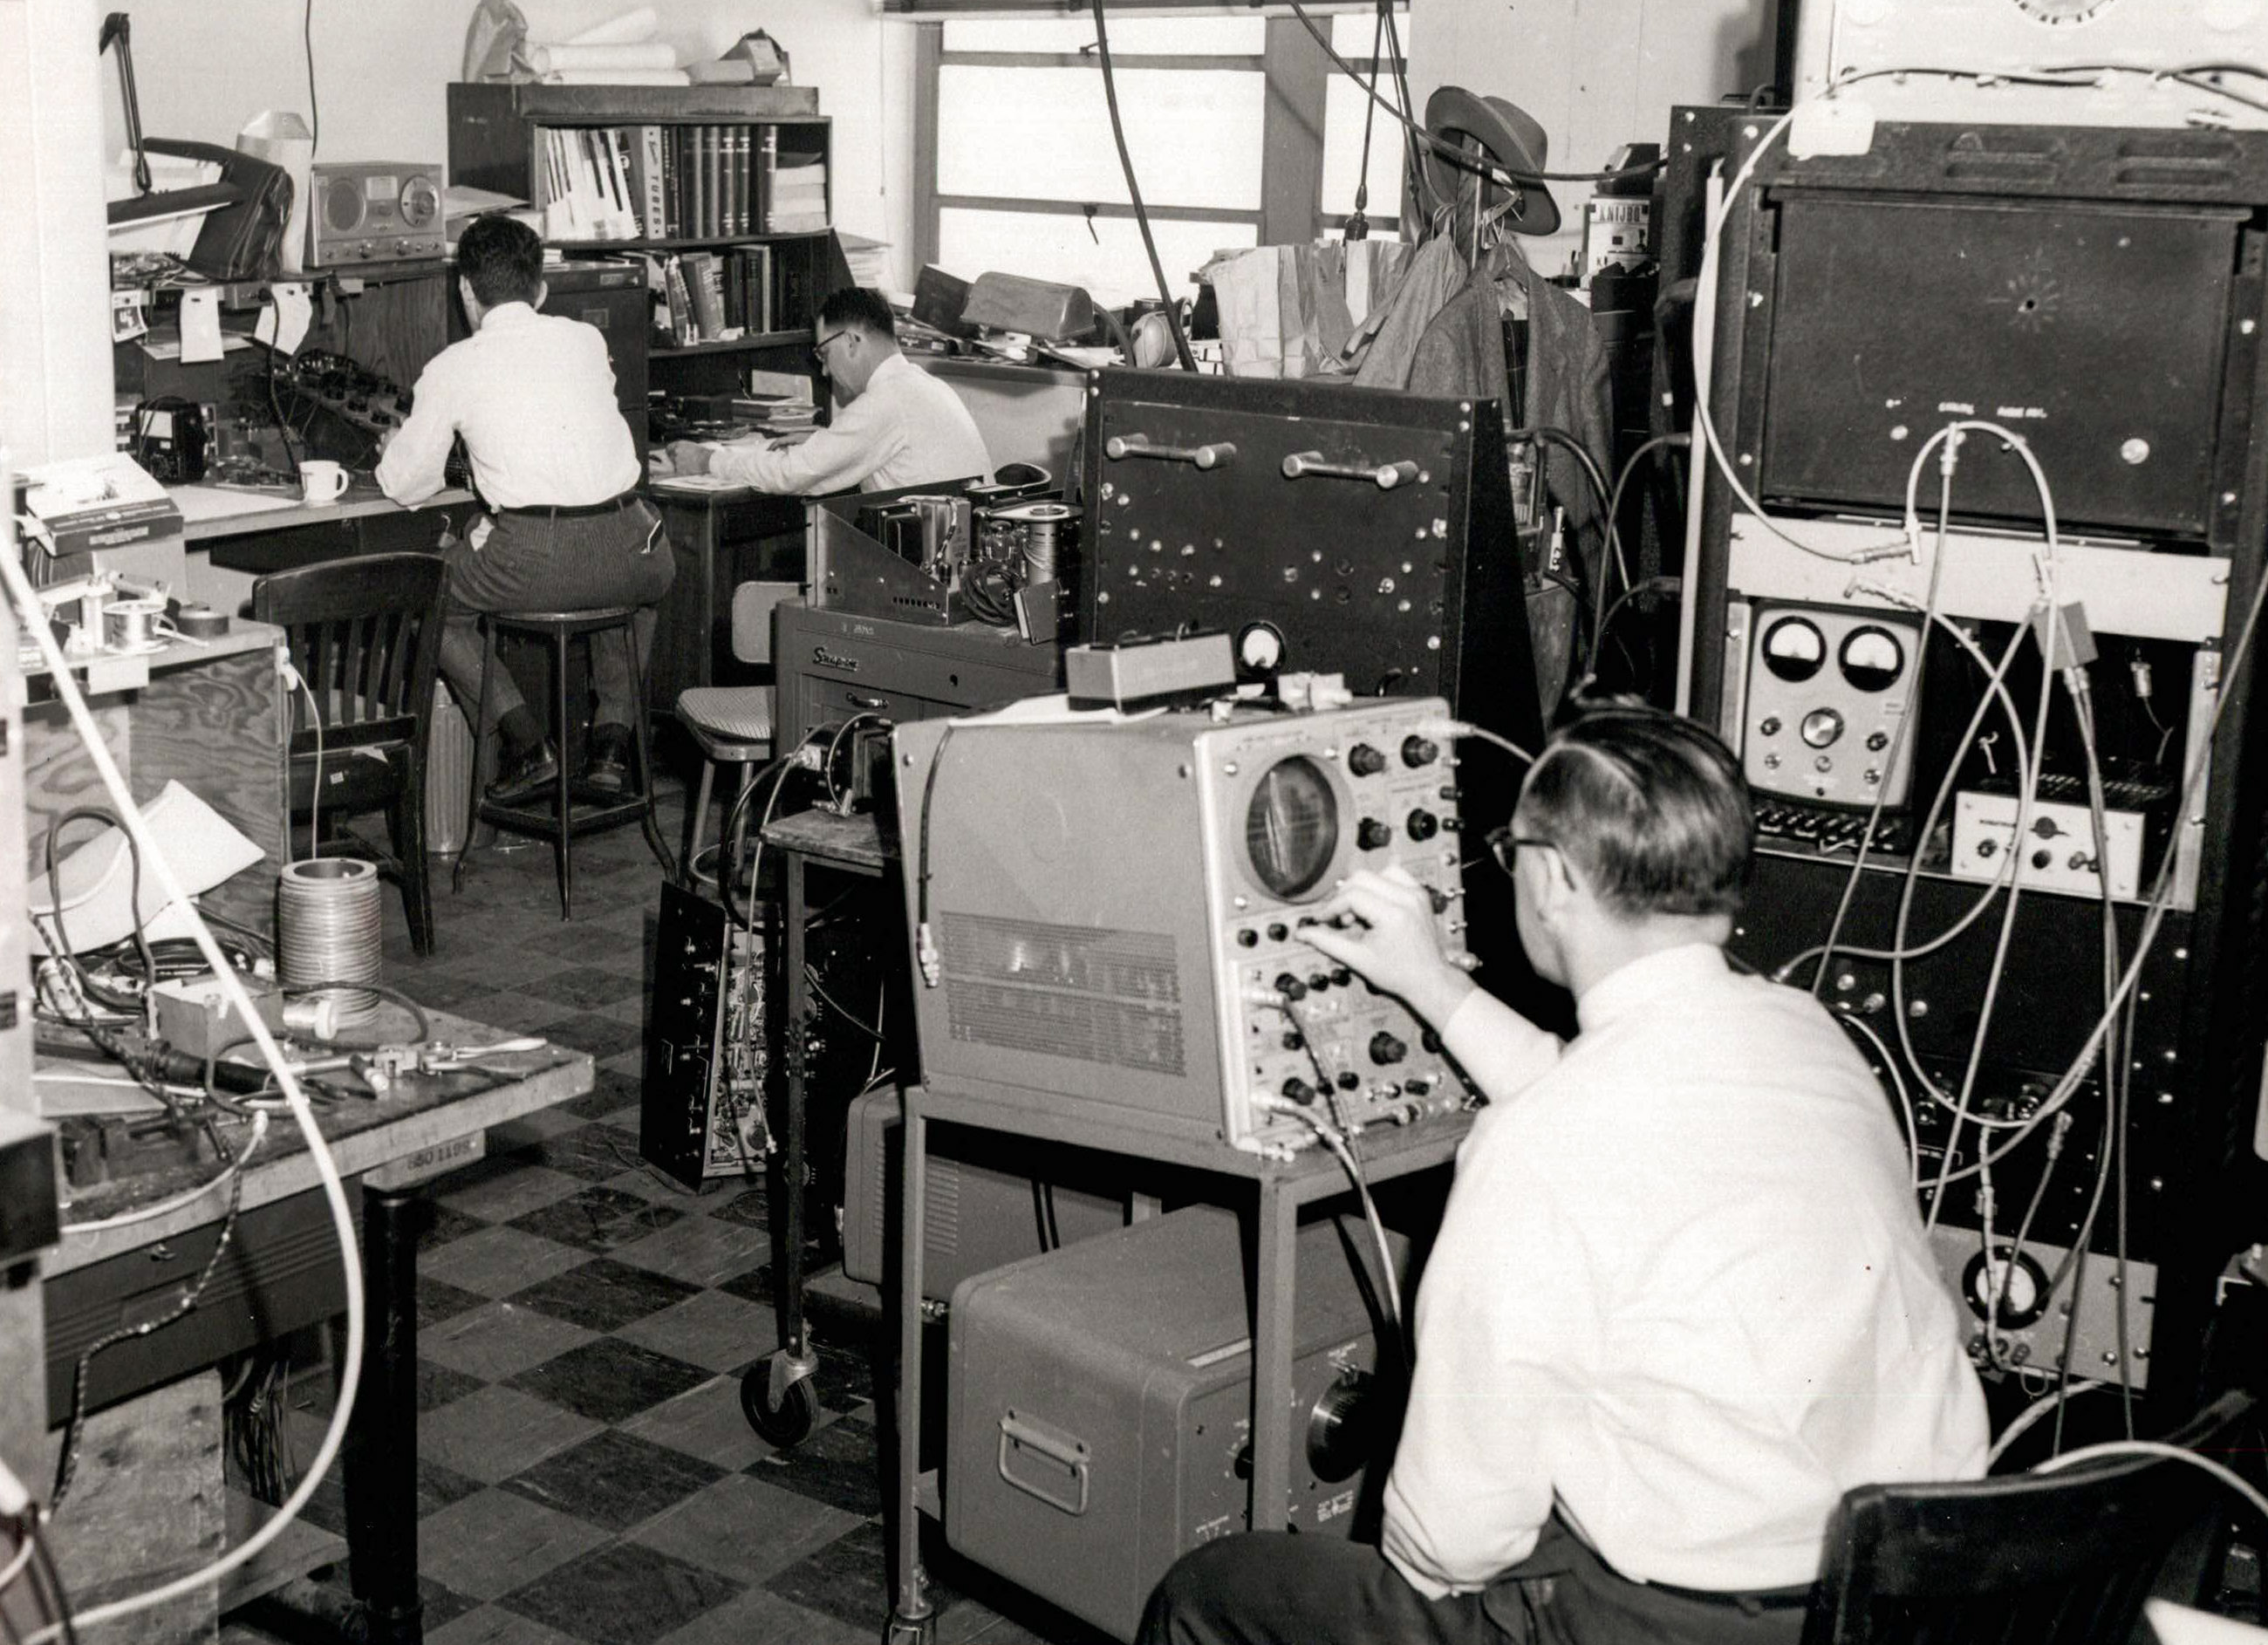 Three workers sit in front of machines